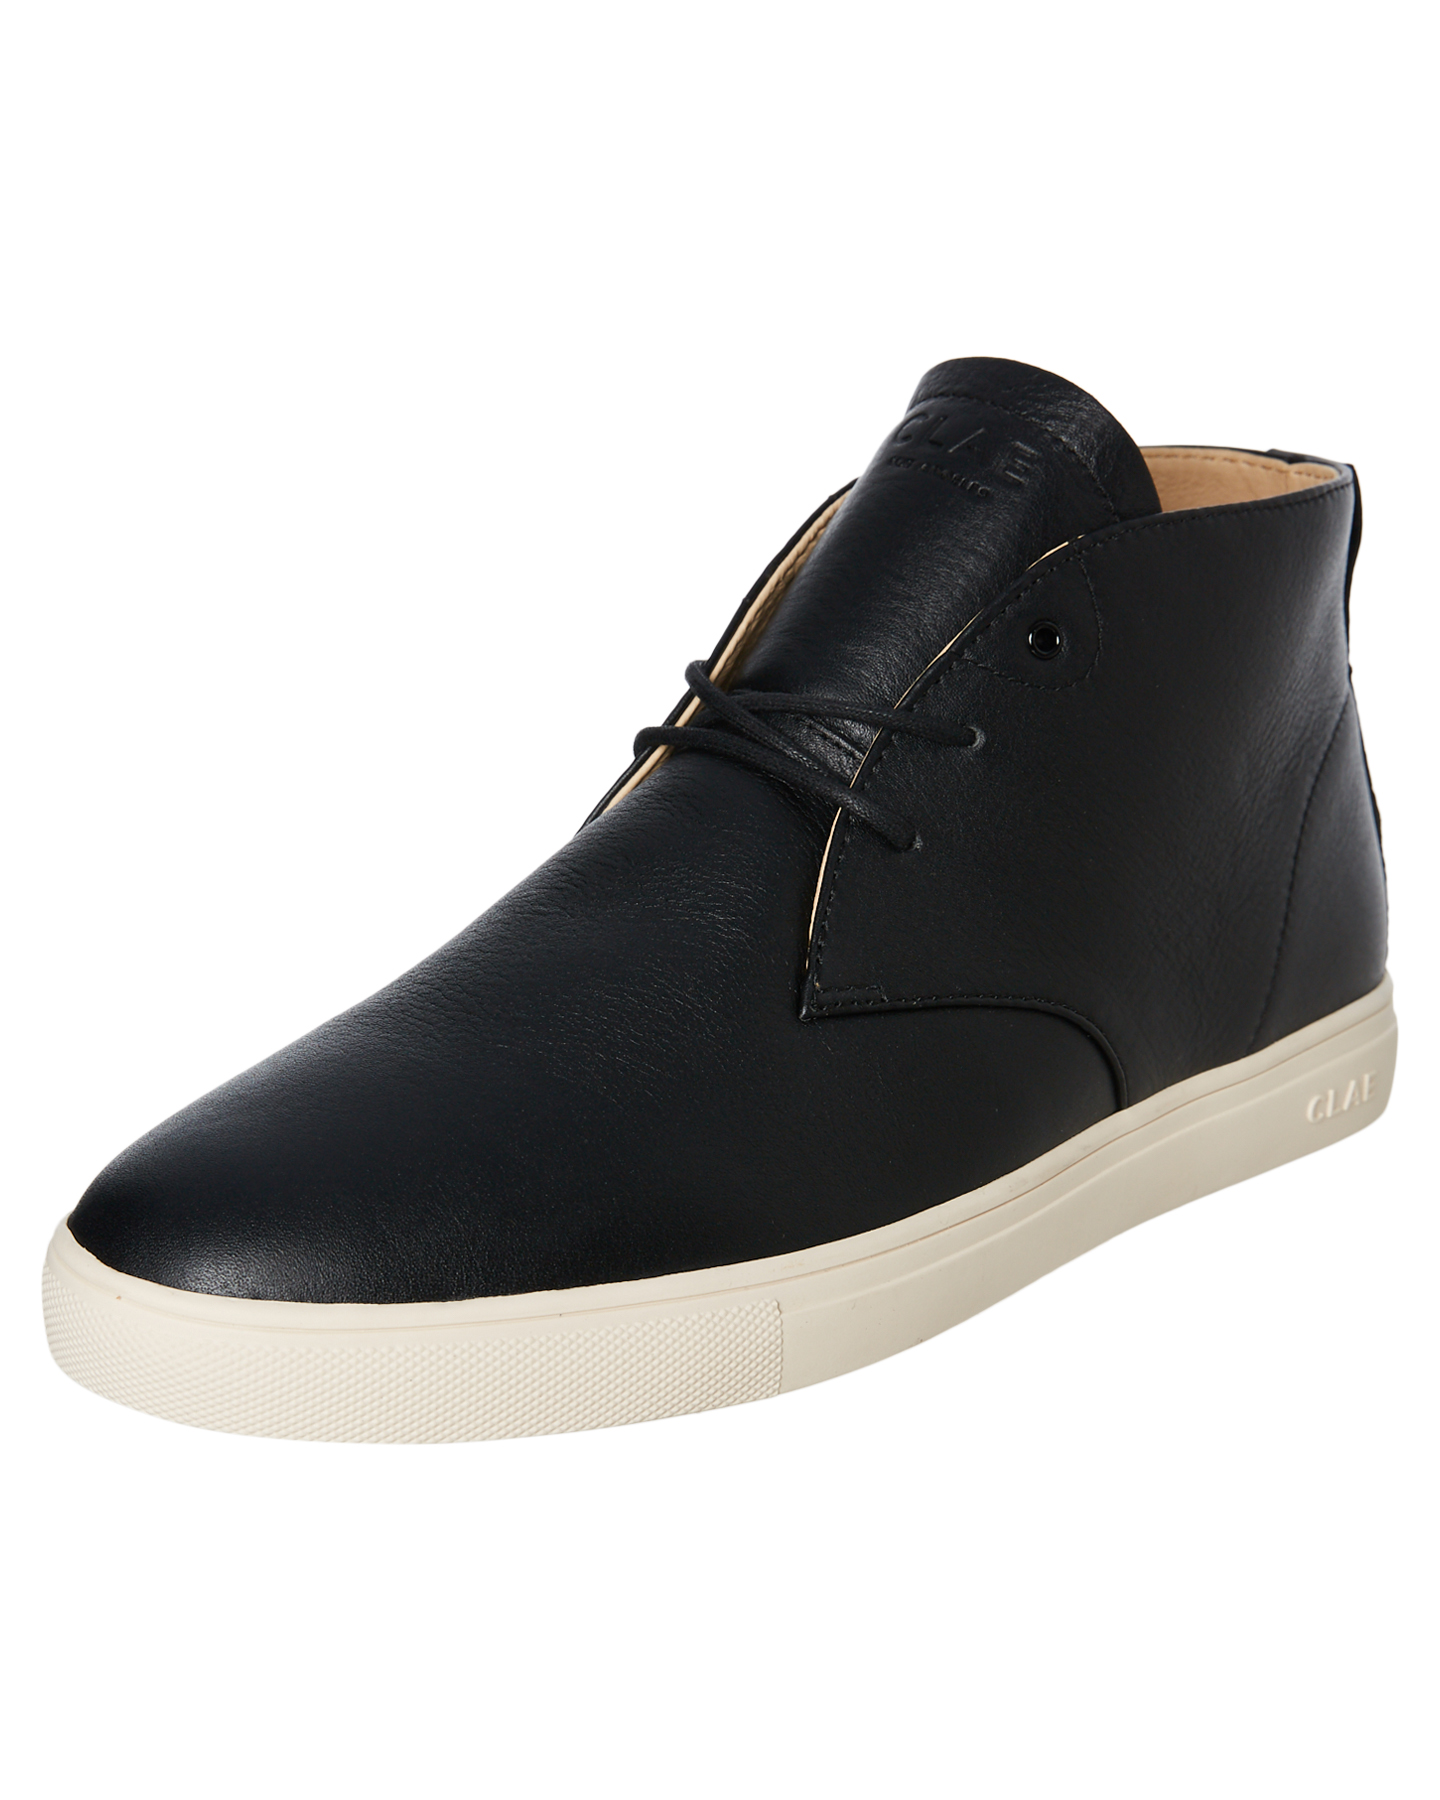 clae shoes on sale